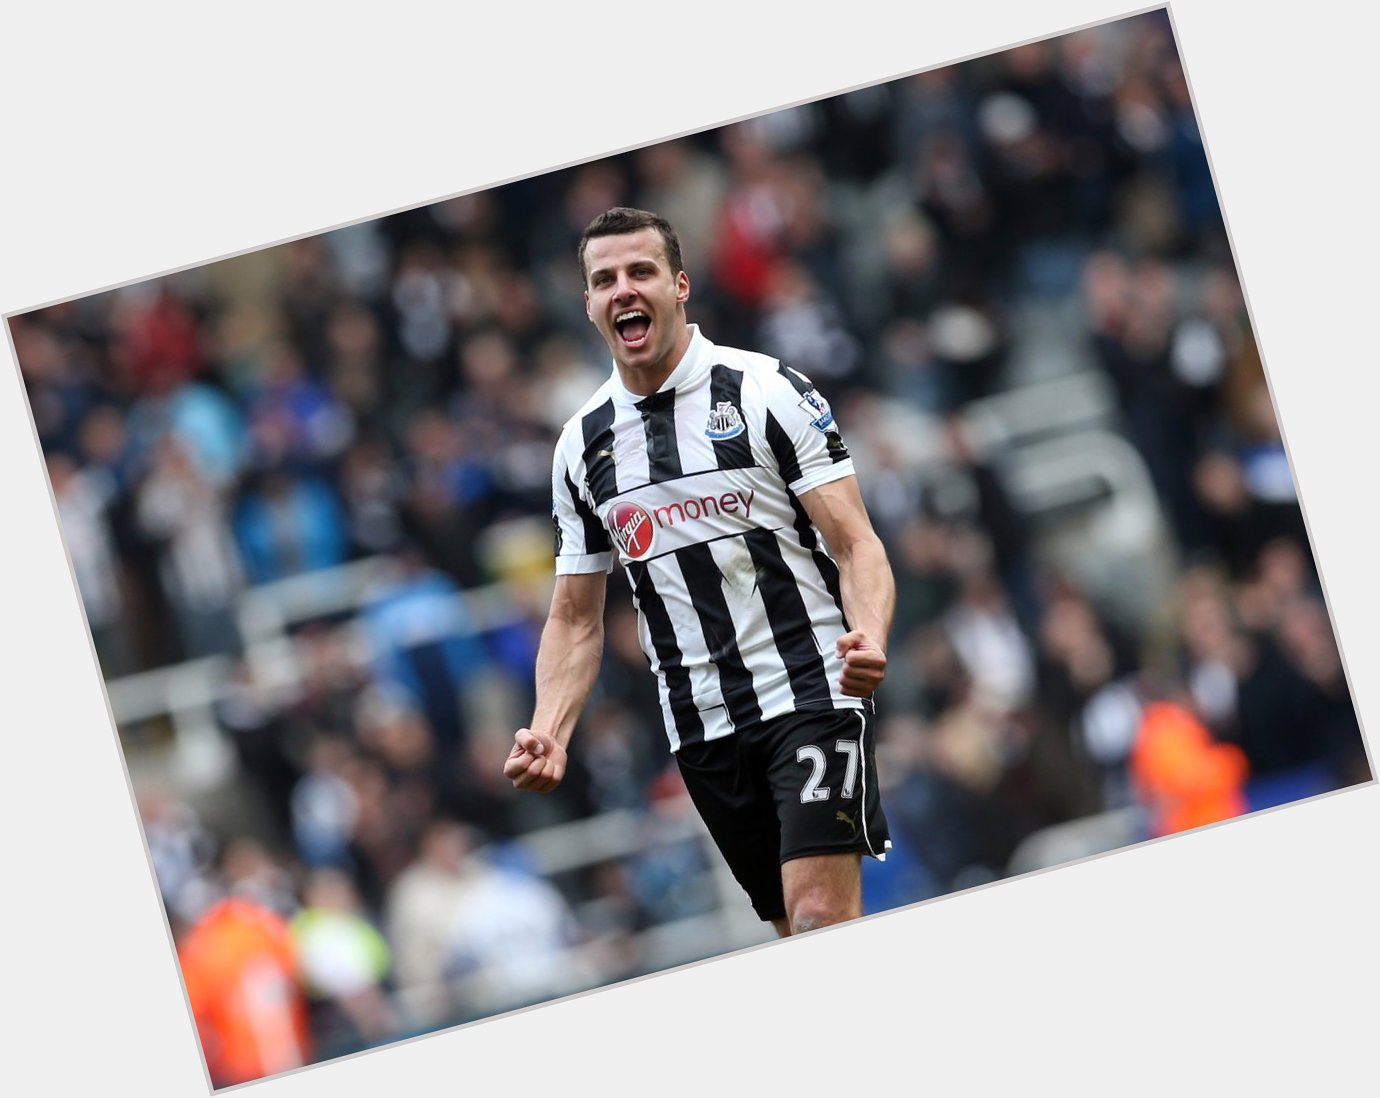 Happy birthday to former Magpies, Steven Taylor and Jose Enrique!  